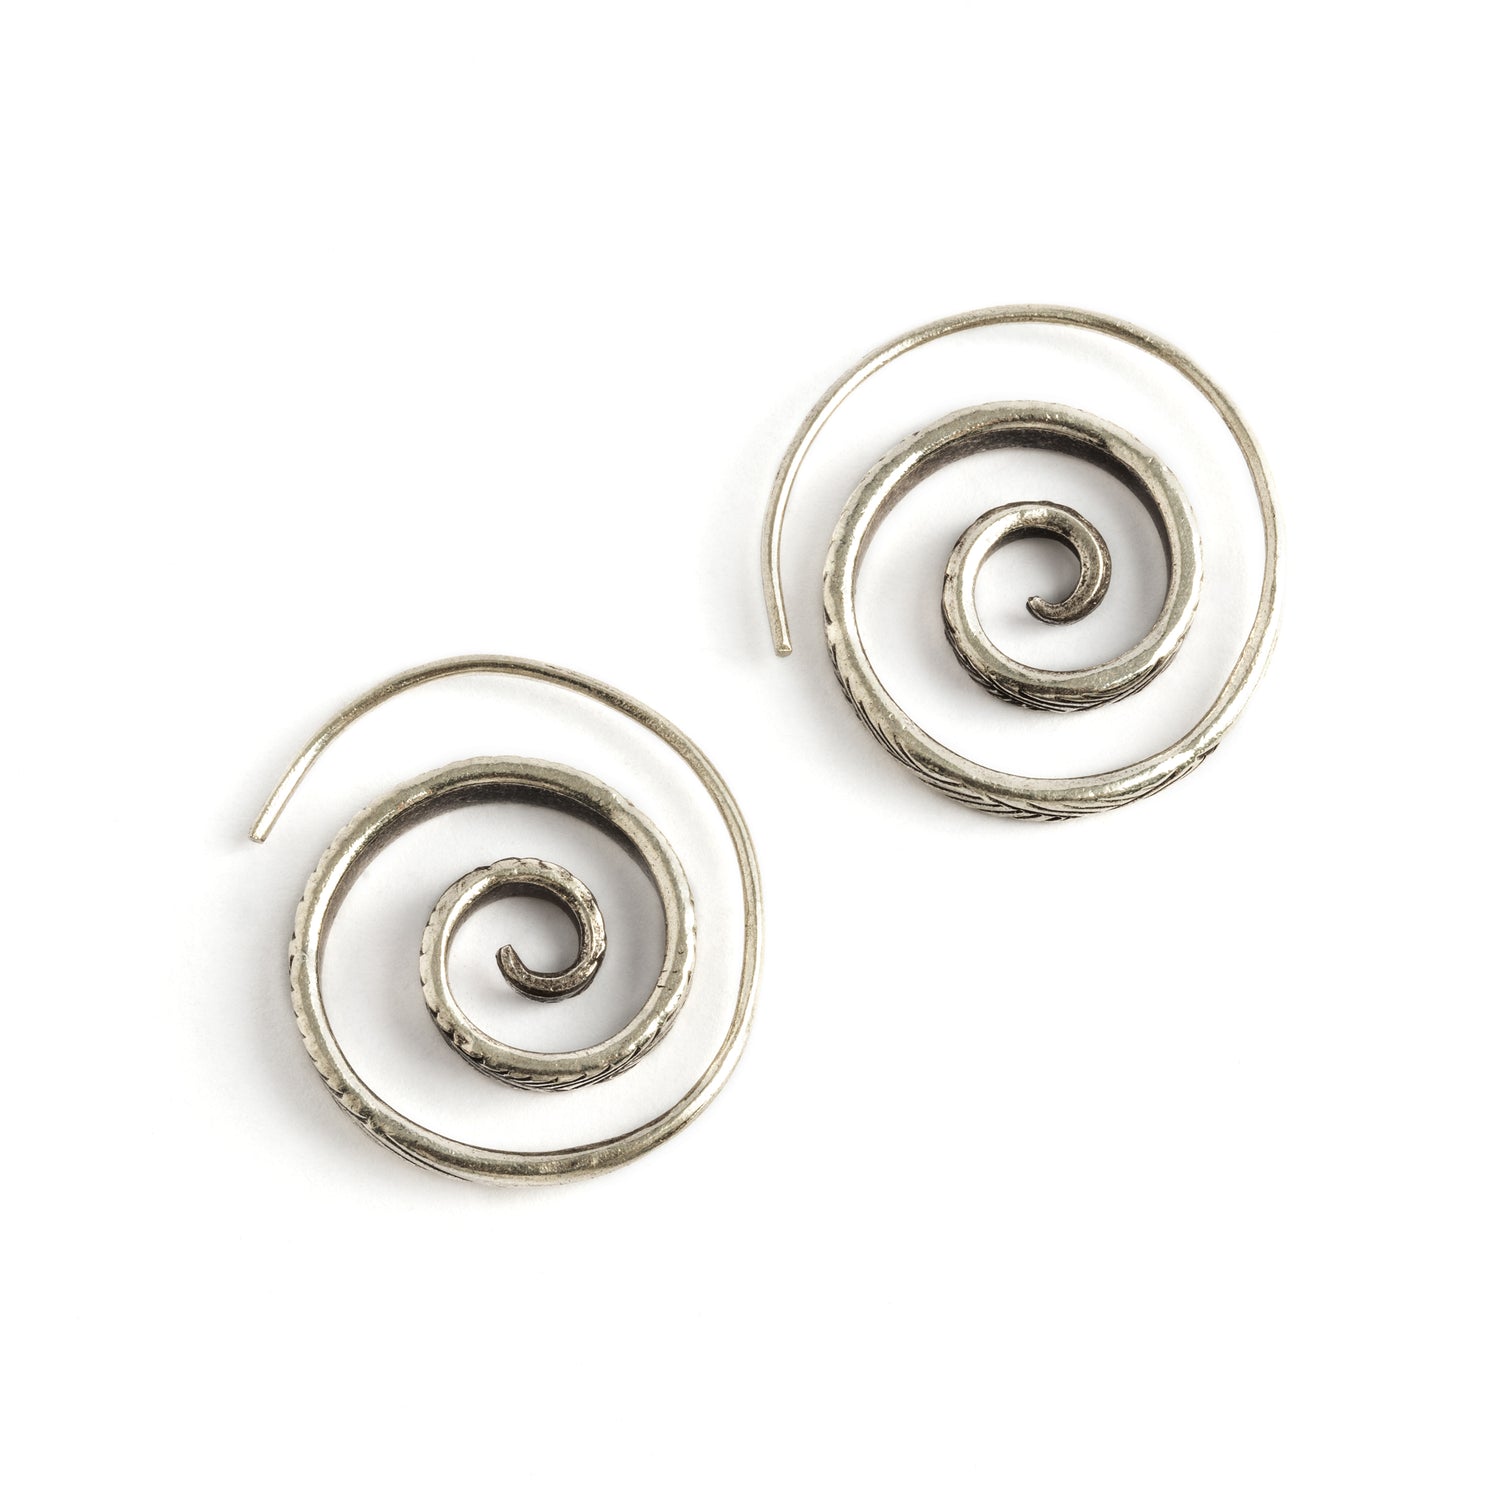 Lao Silver Spirals earrings frontal view